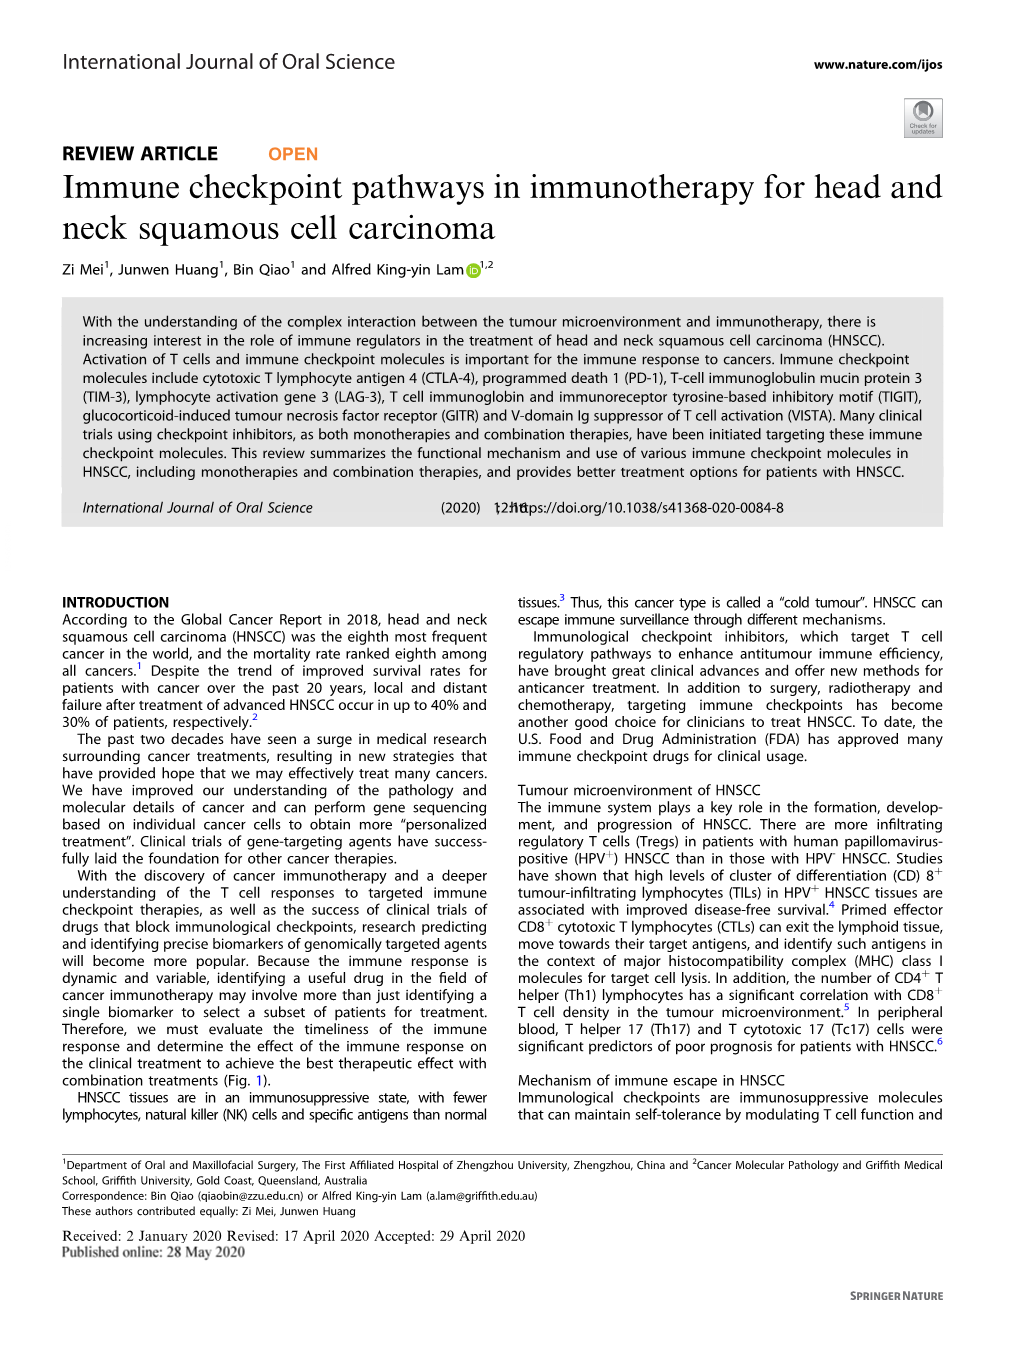 Immune Checkpoint Pathways in Immunotherapy for Head and Neck Squamous Cell Carcinoma